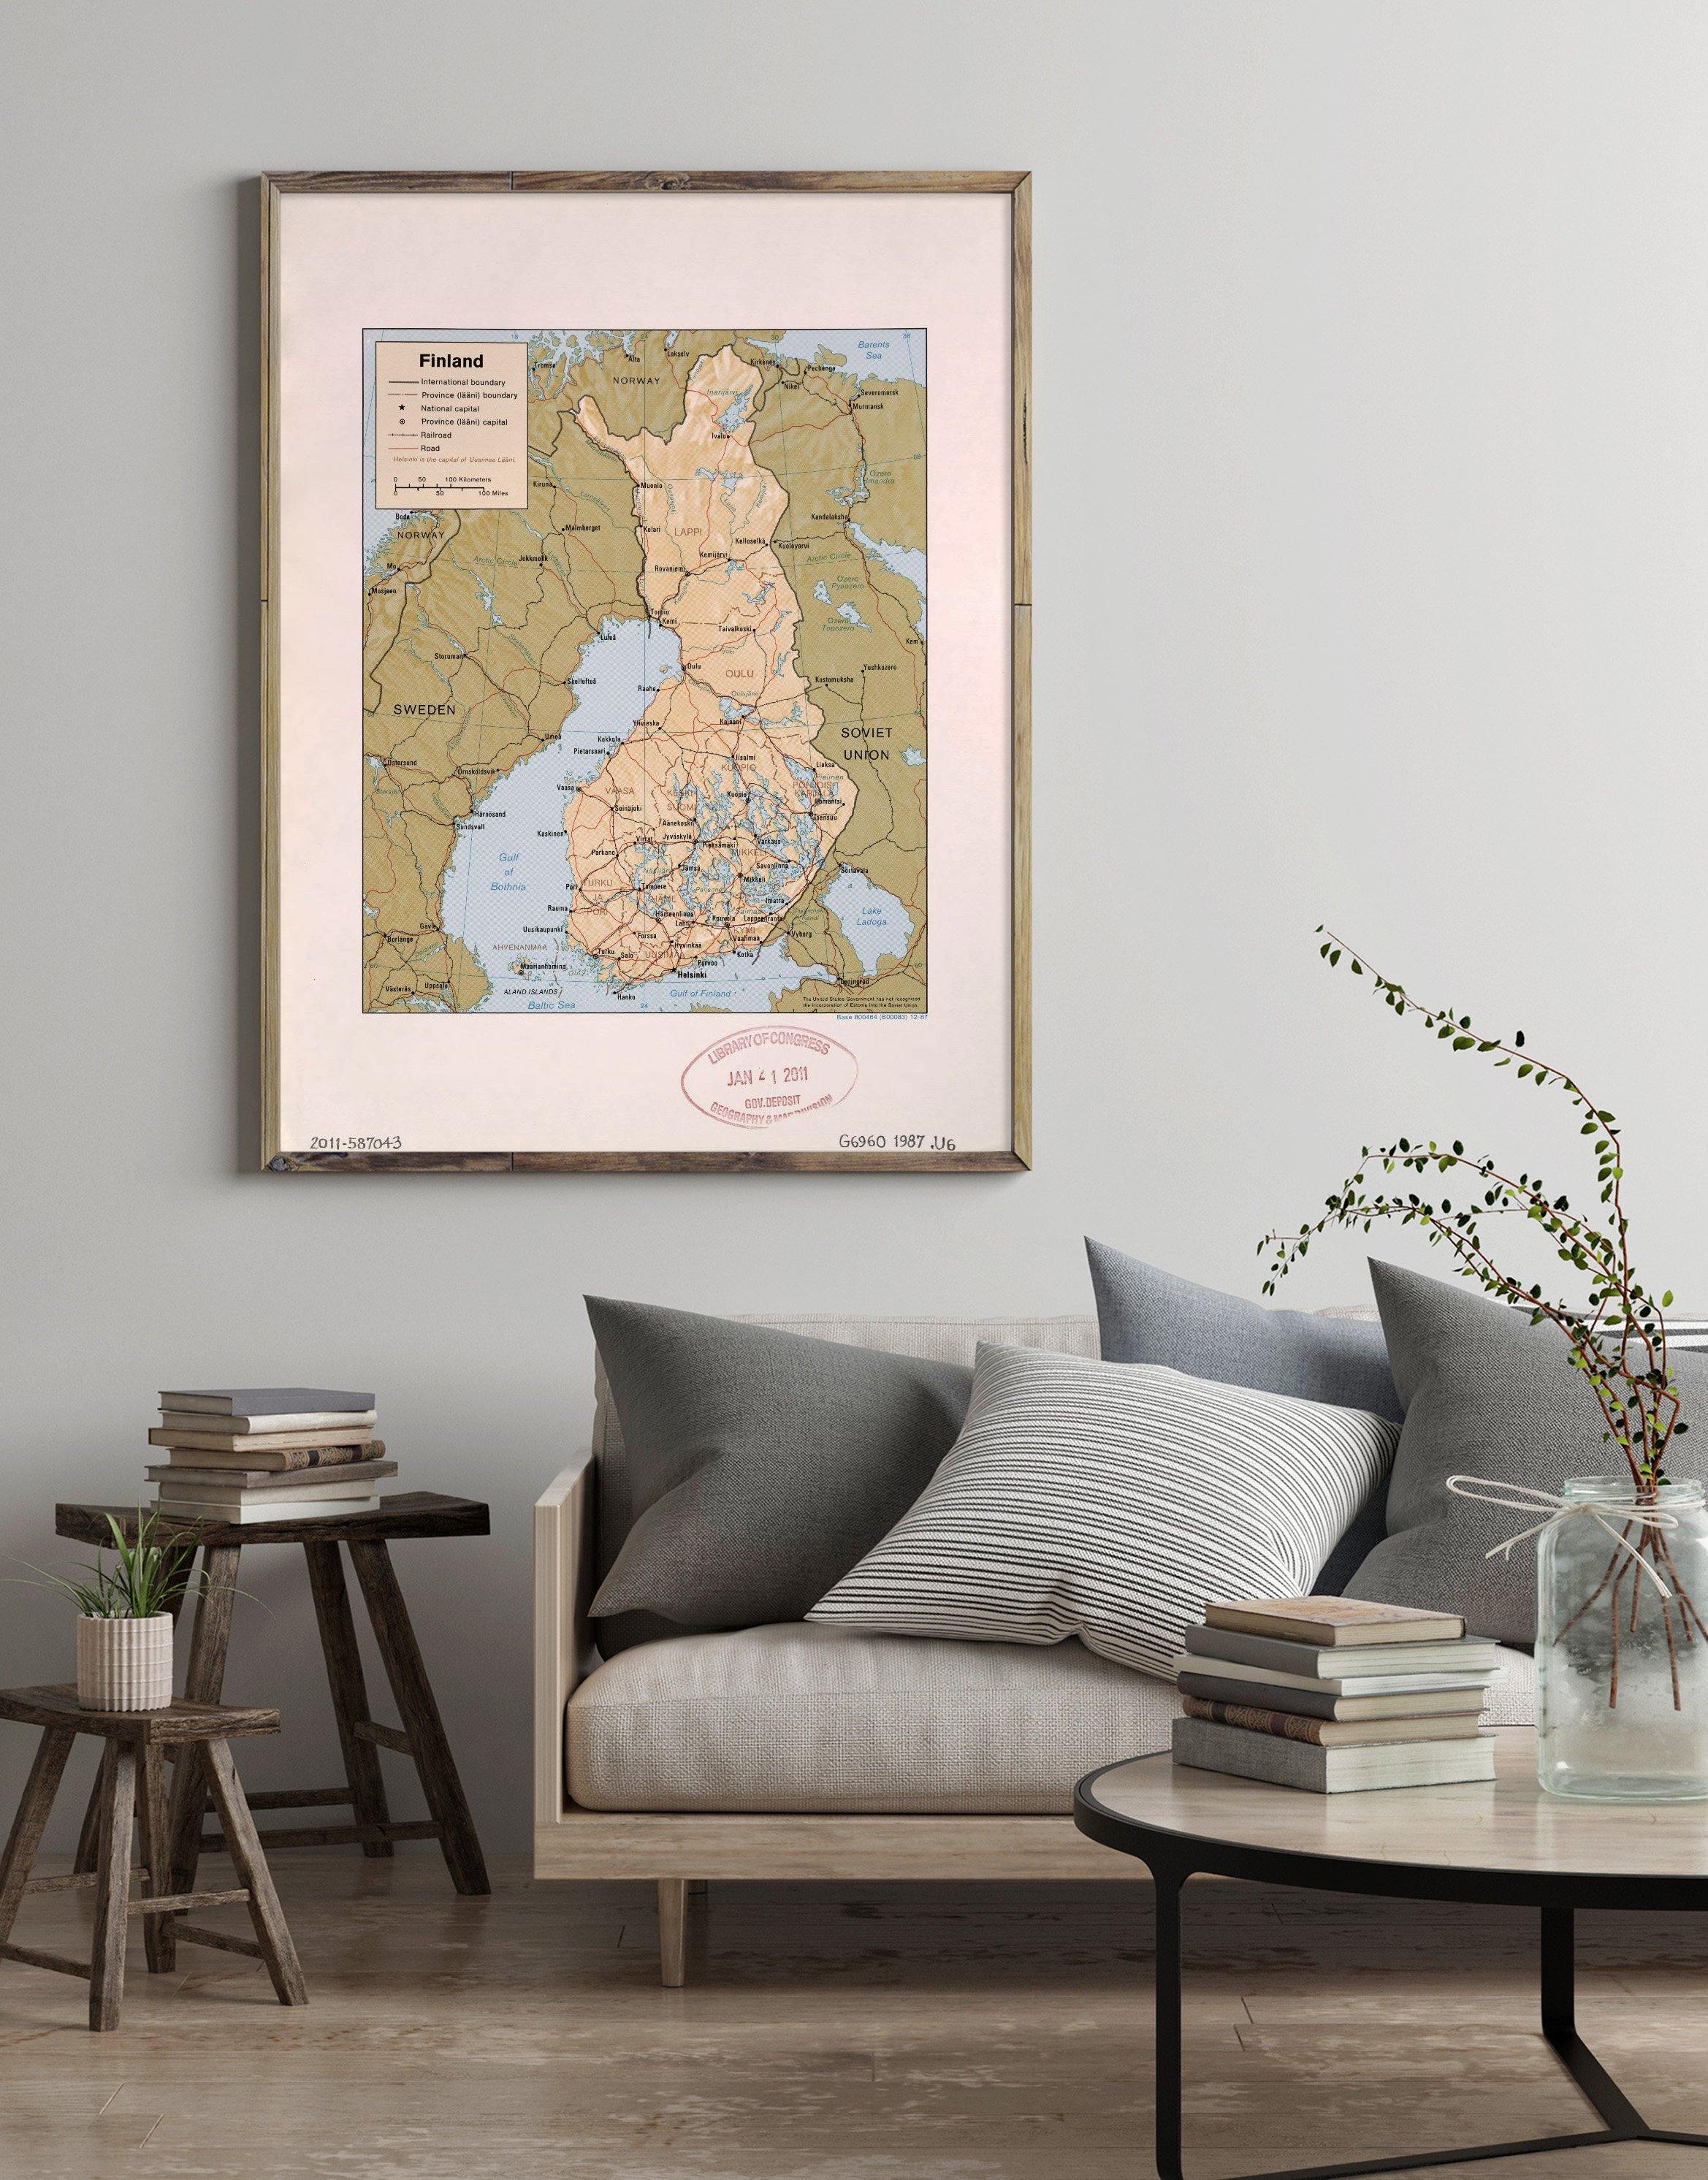 1987 Map| Finland| Finland Map Size: 18 inches x 24 inches |Fits 18x24 - New York Map Company